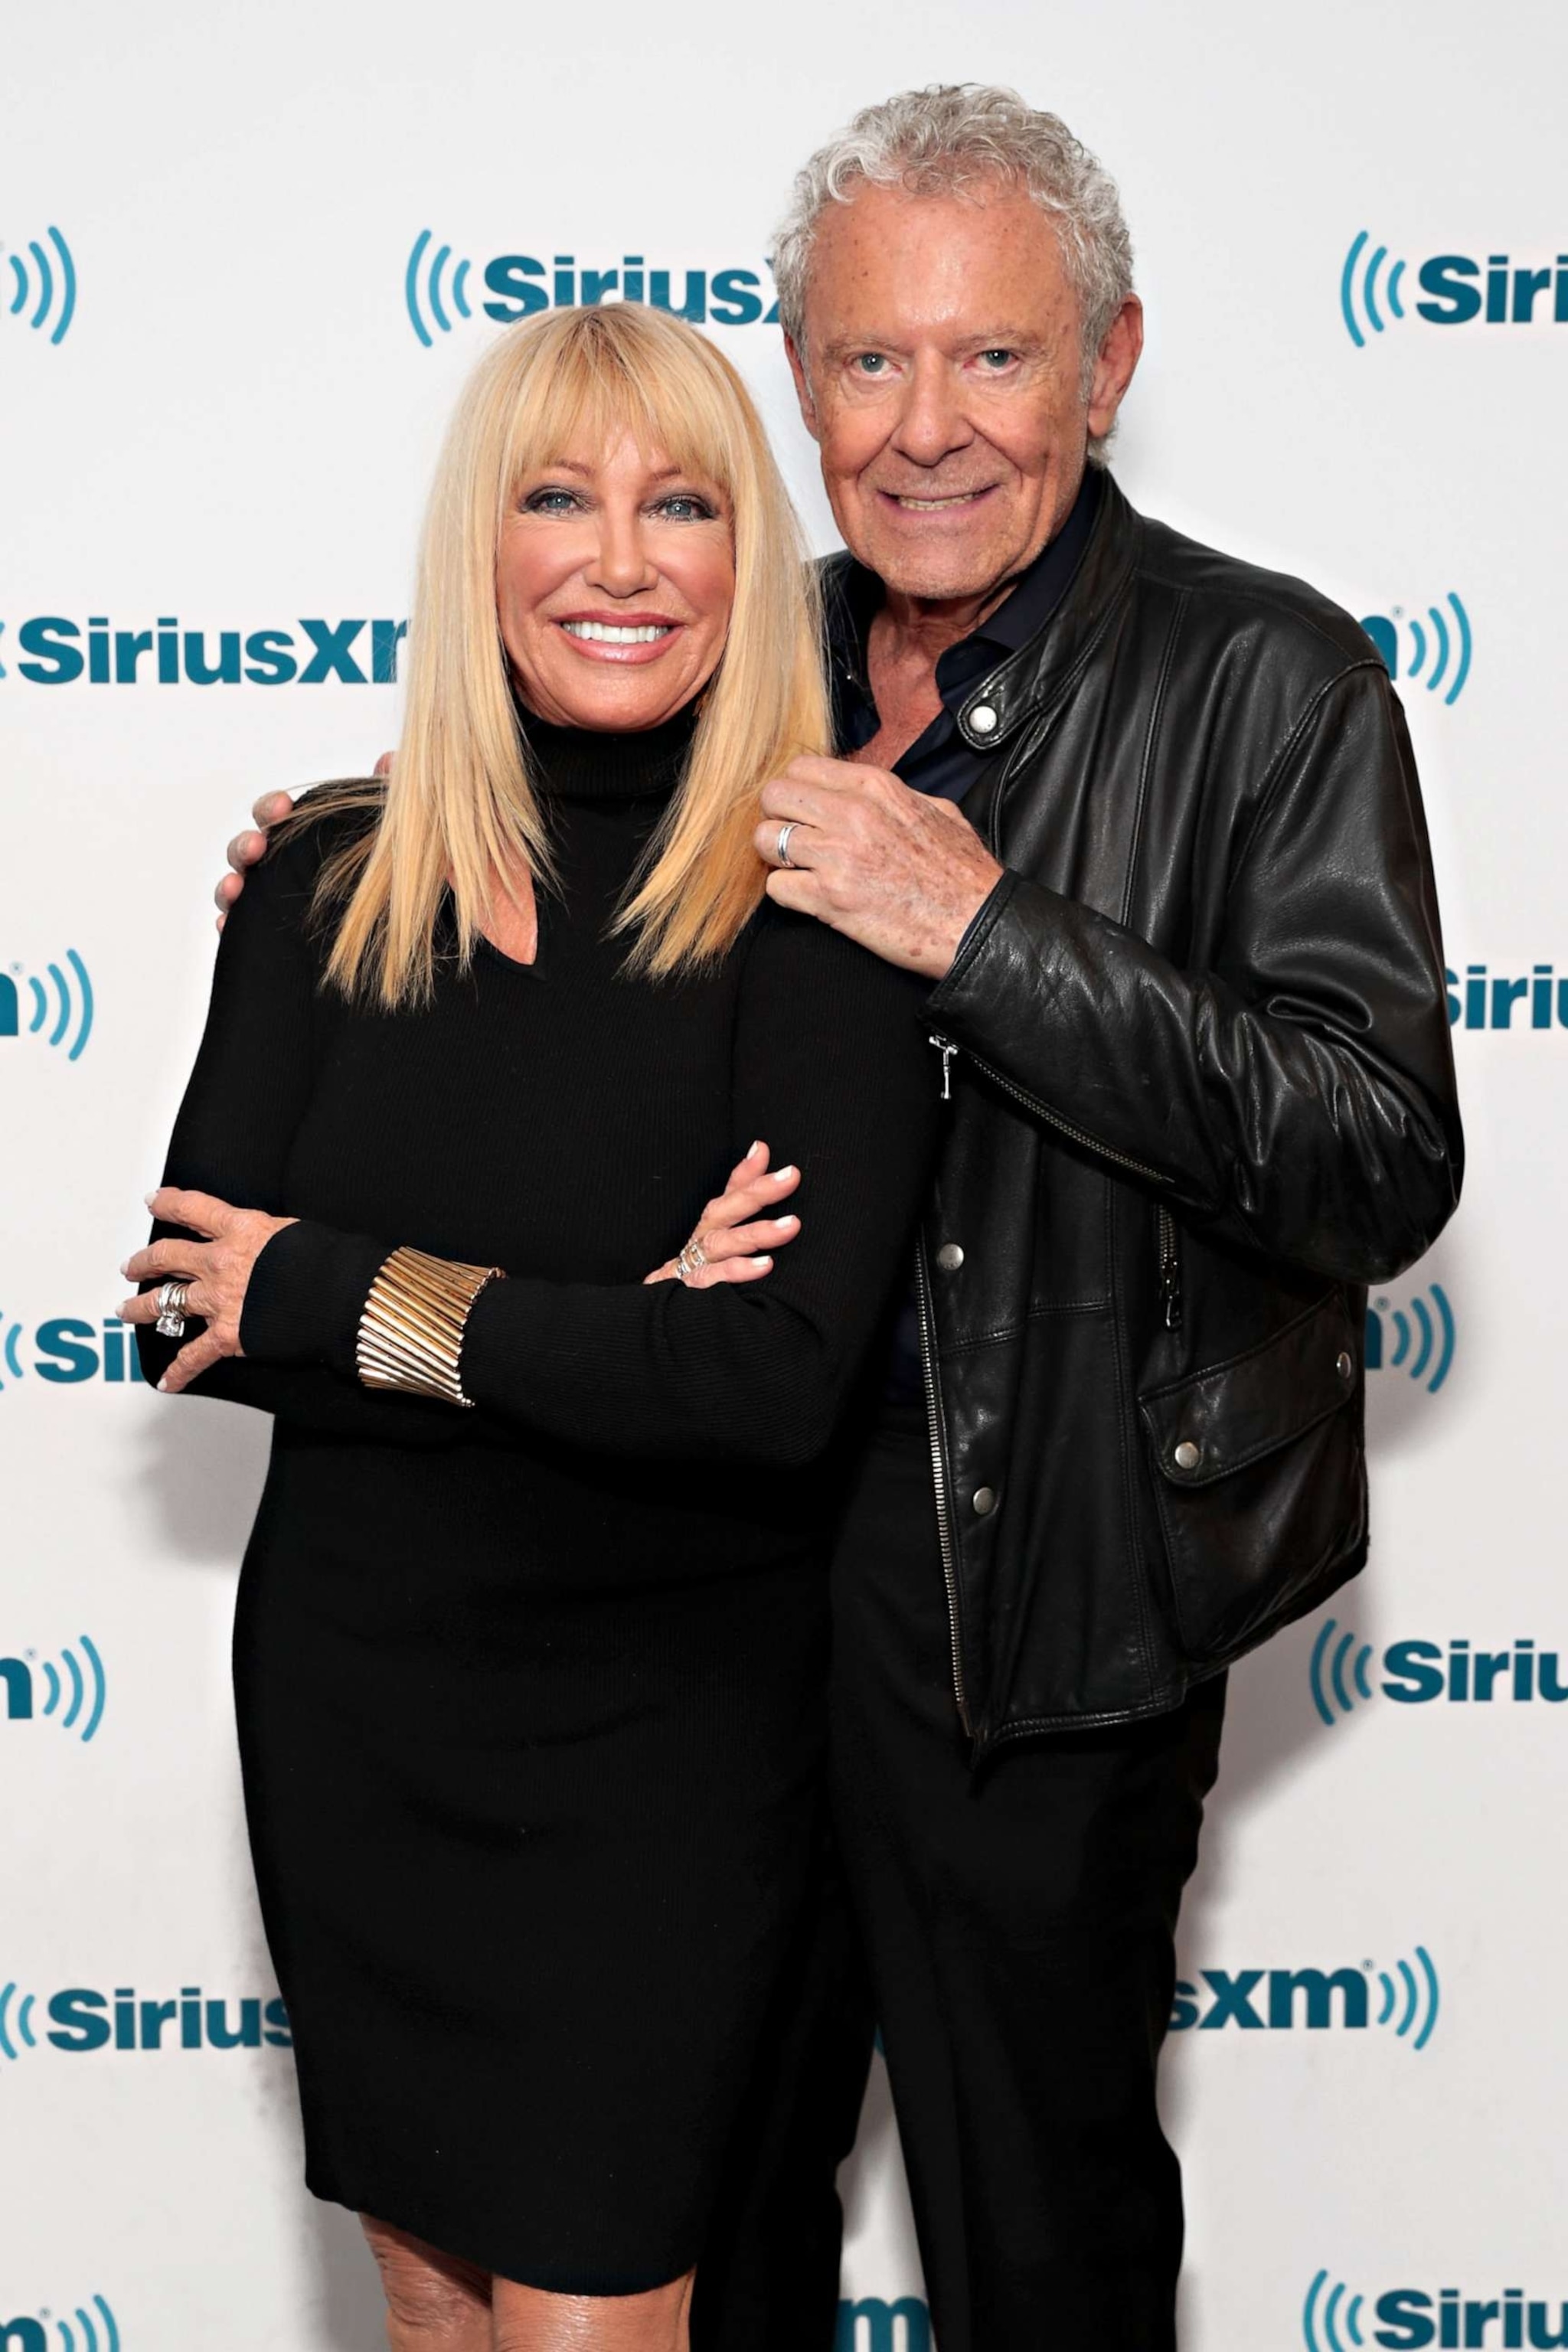 PHOTO: Suzanne Somers and husband Alan Hamel visit the SiriusXM Studios on November 15, 2017 in New York City.